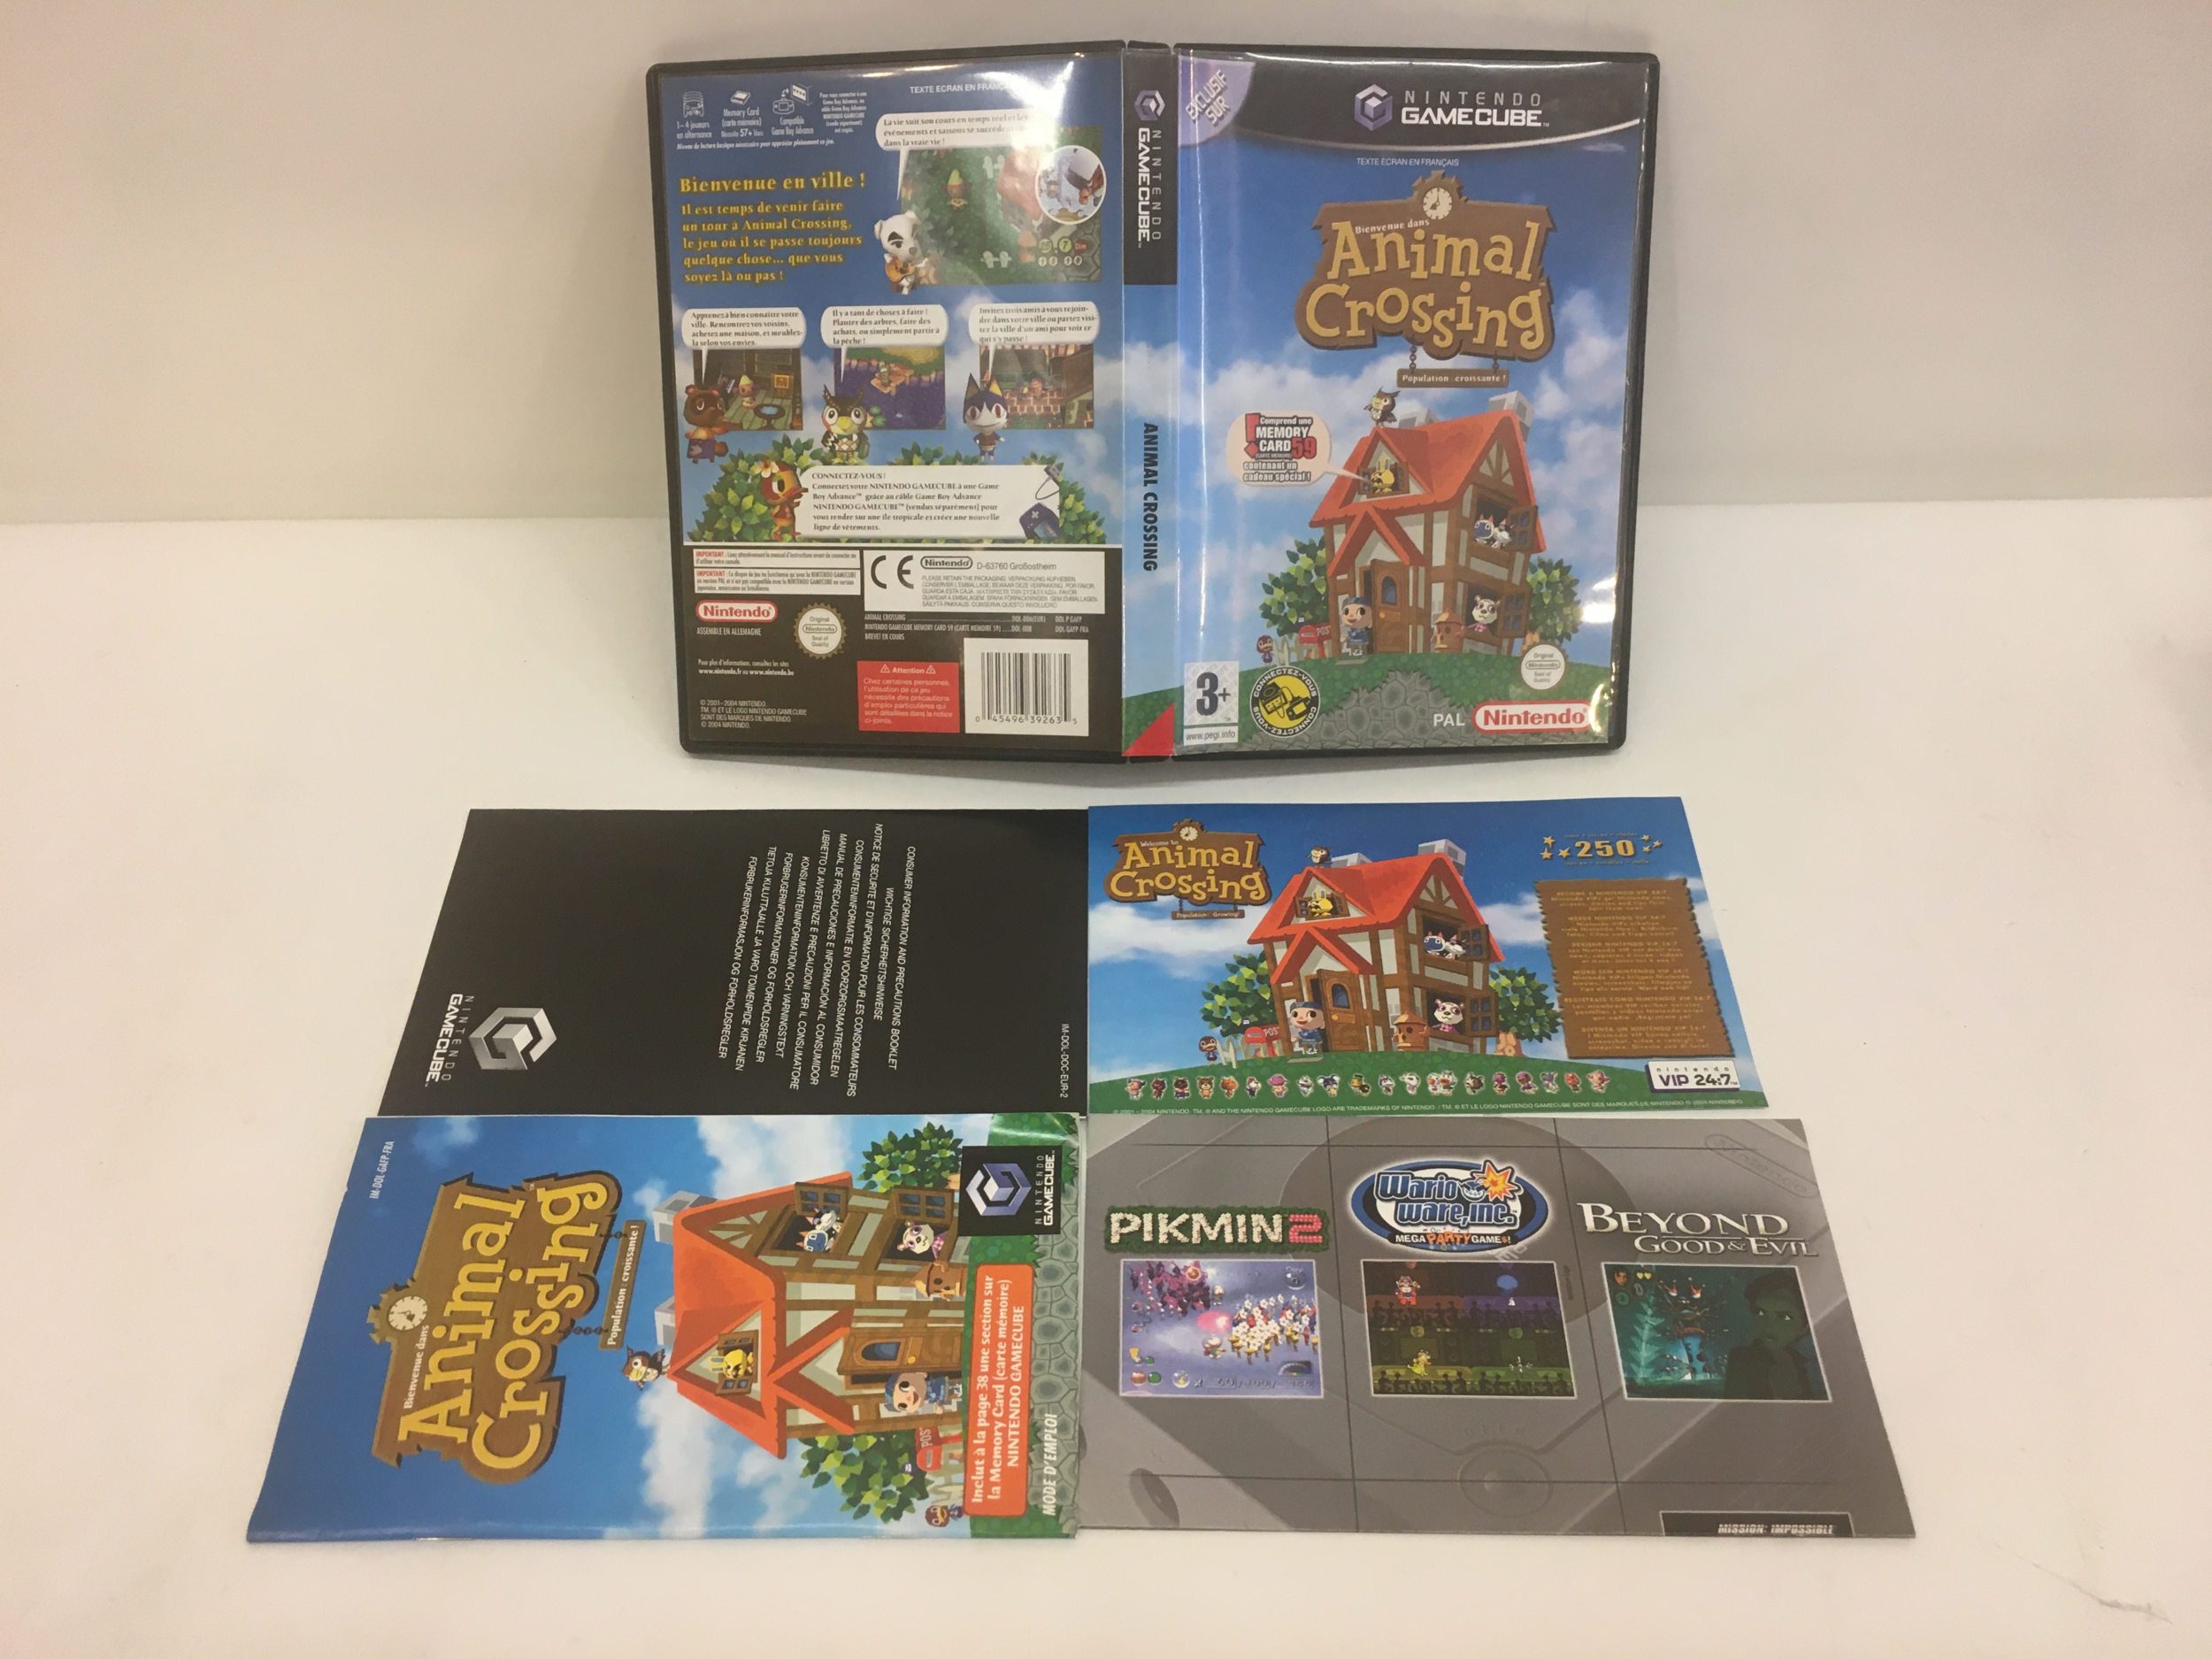 99 List Animal Crossing Gamecube Guide Book with Best Writers